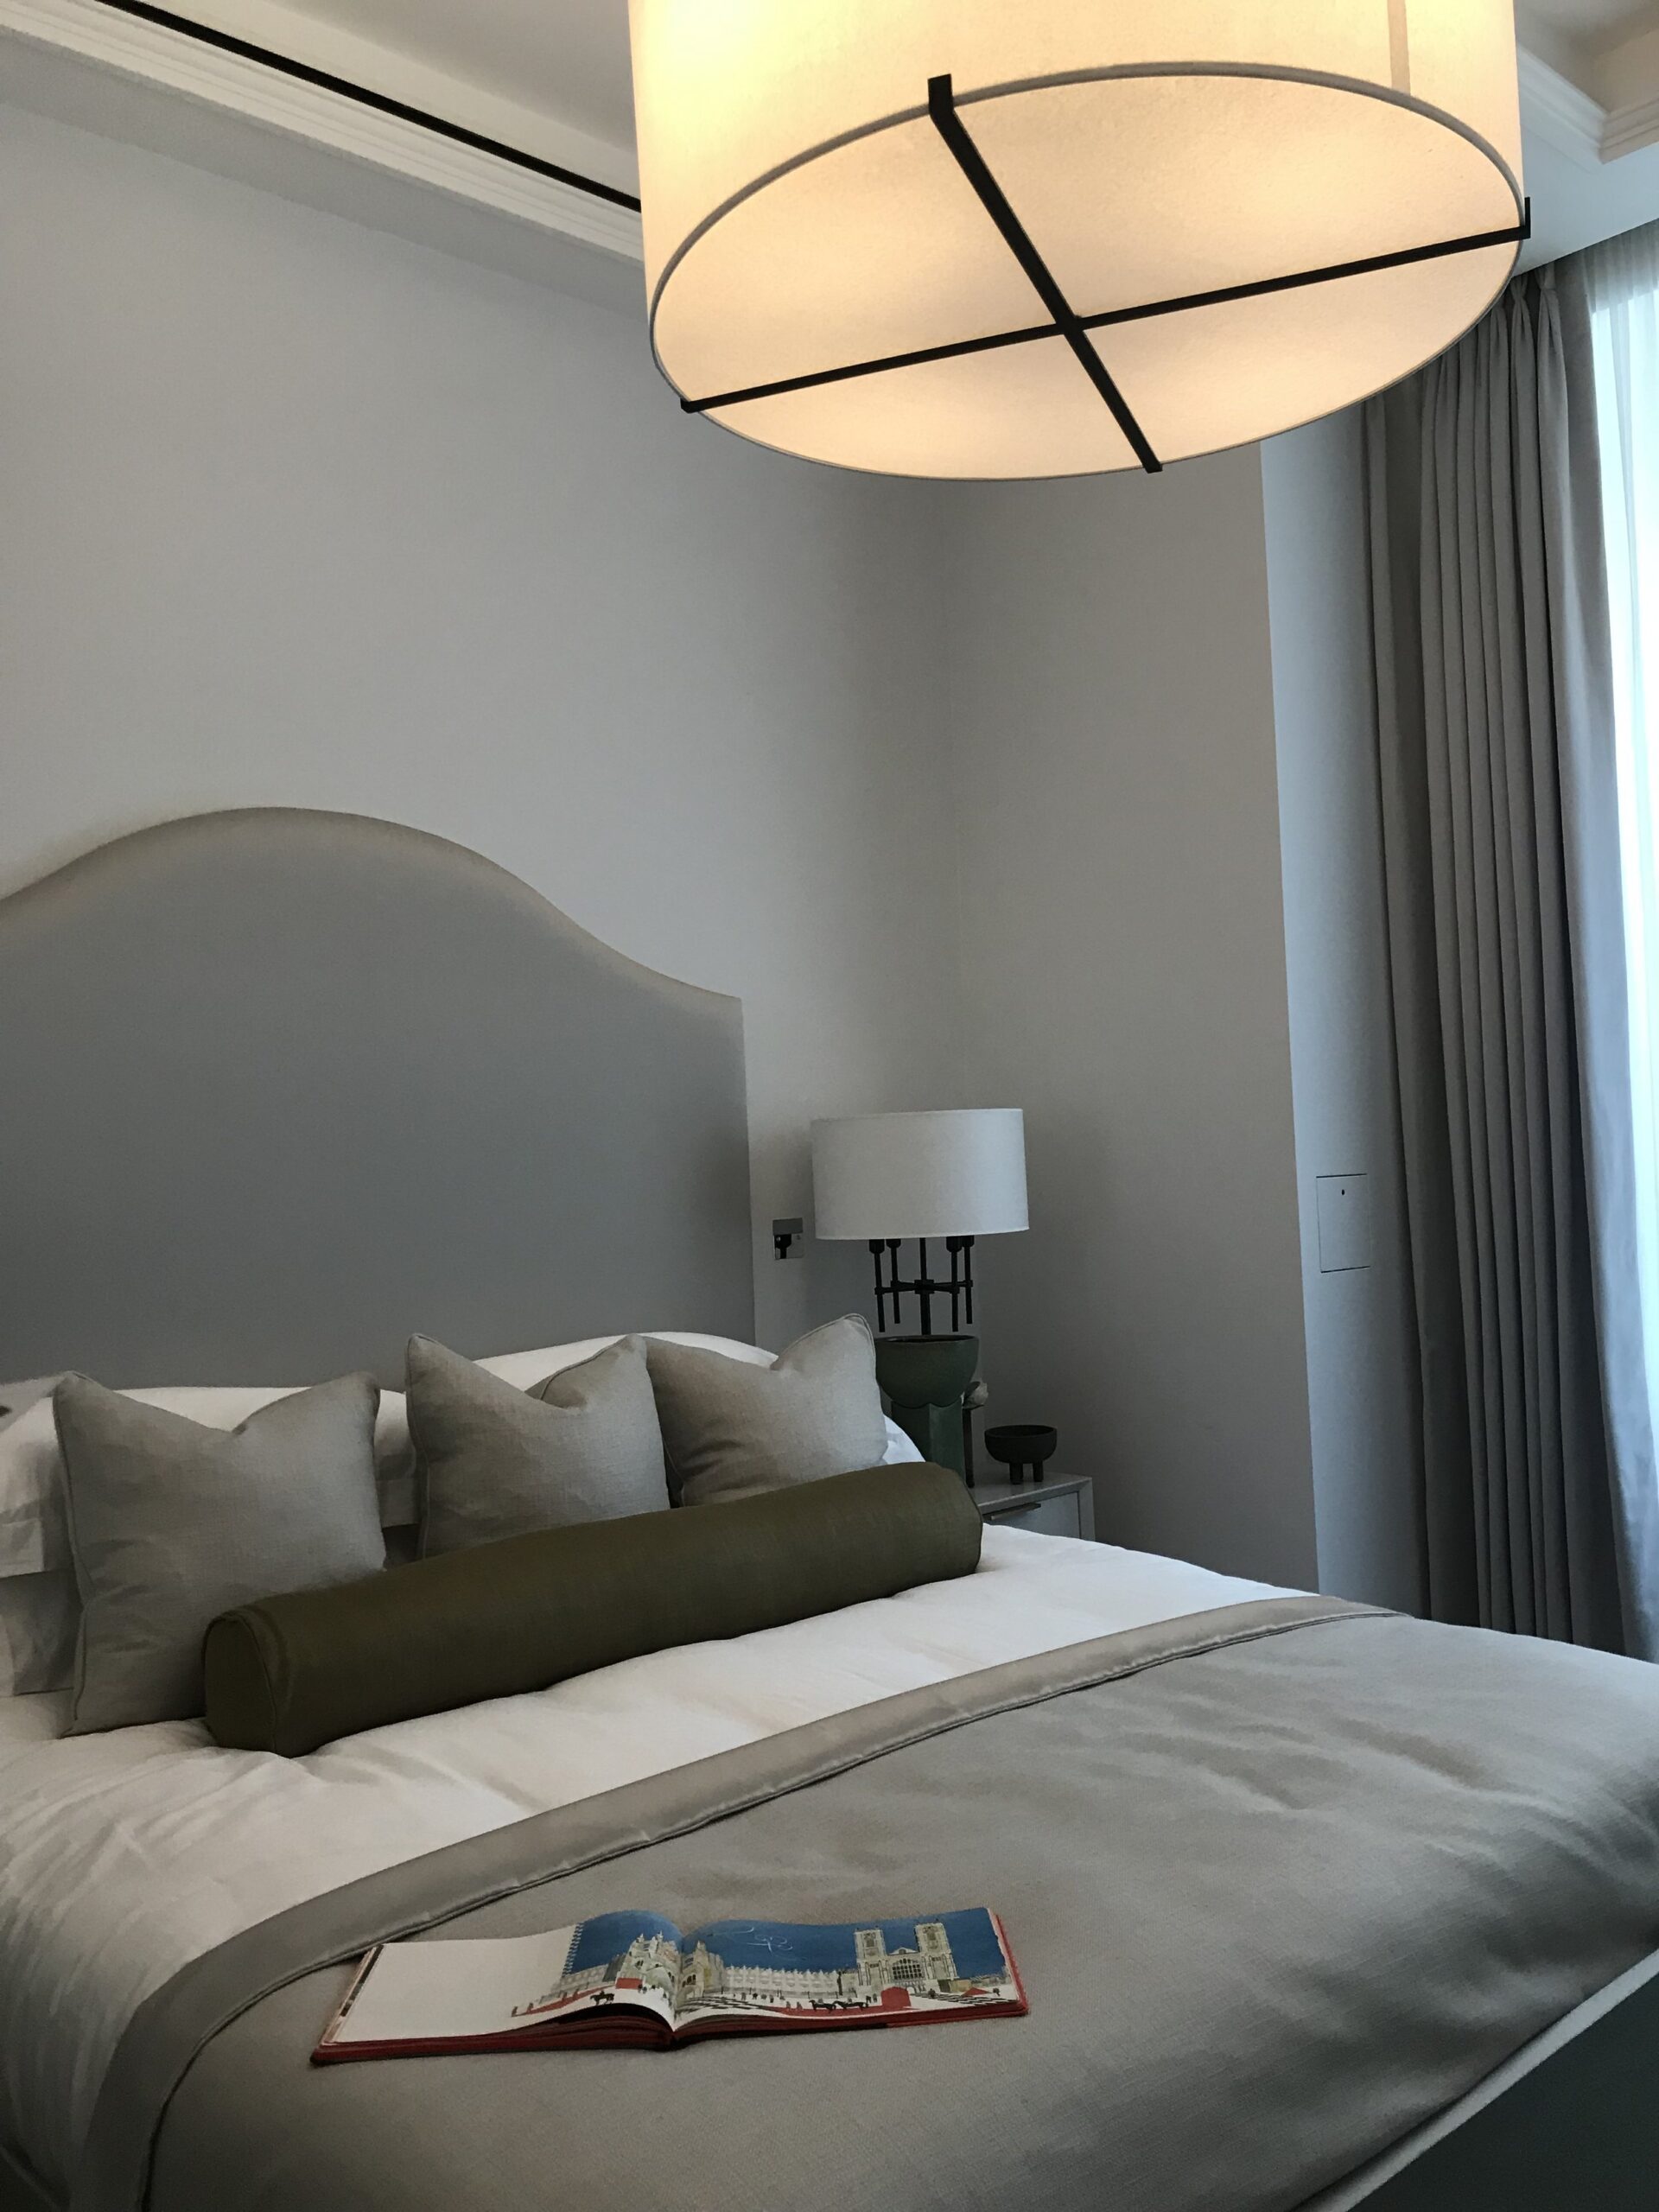 Shot of bedroom with large pendant light over the bed